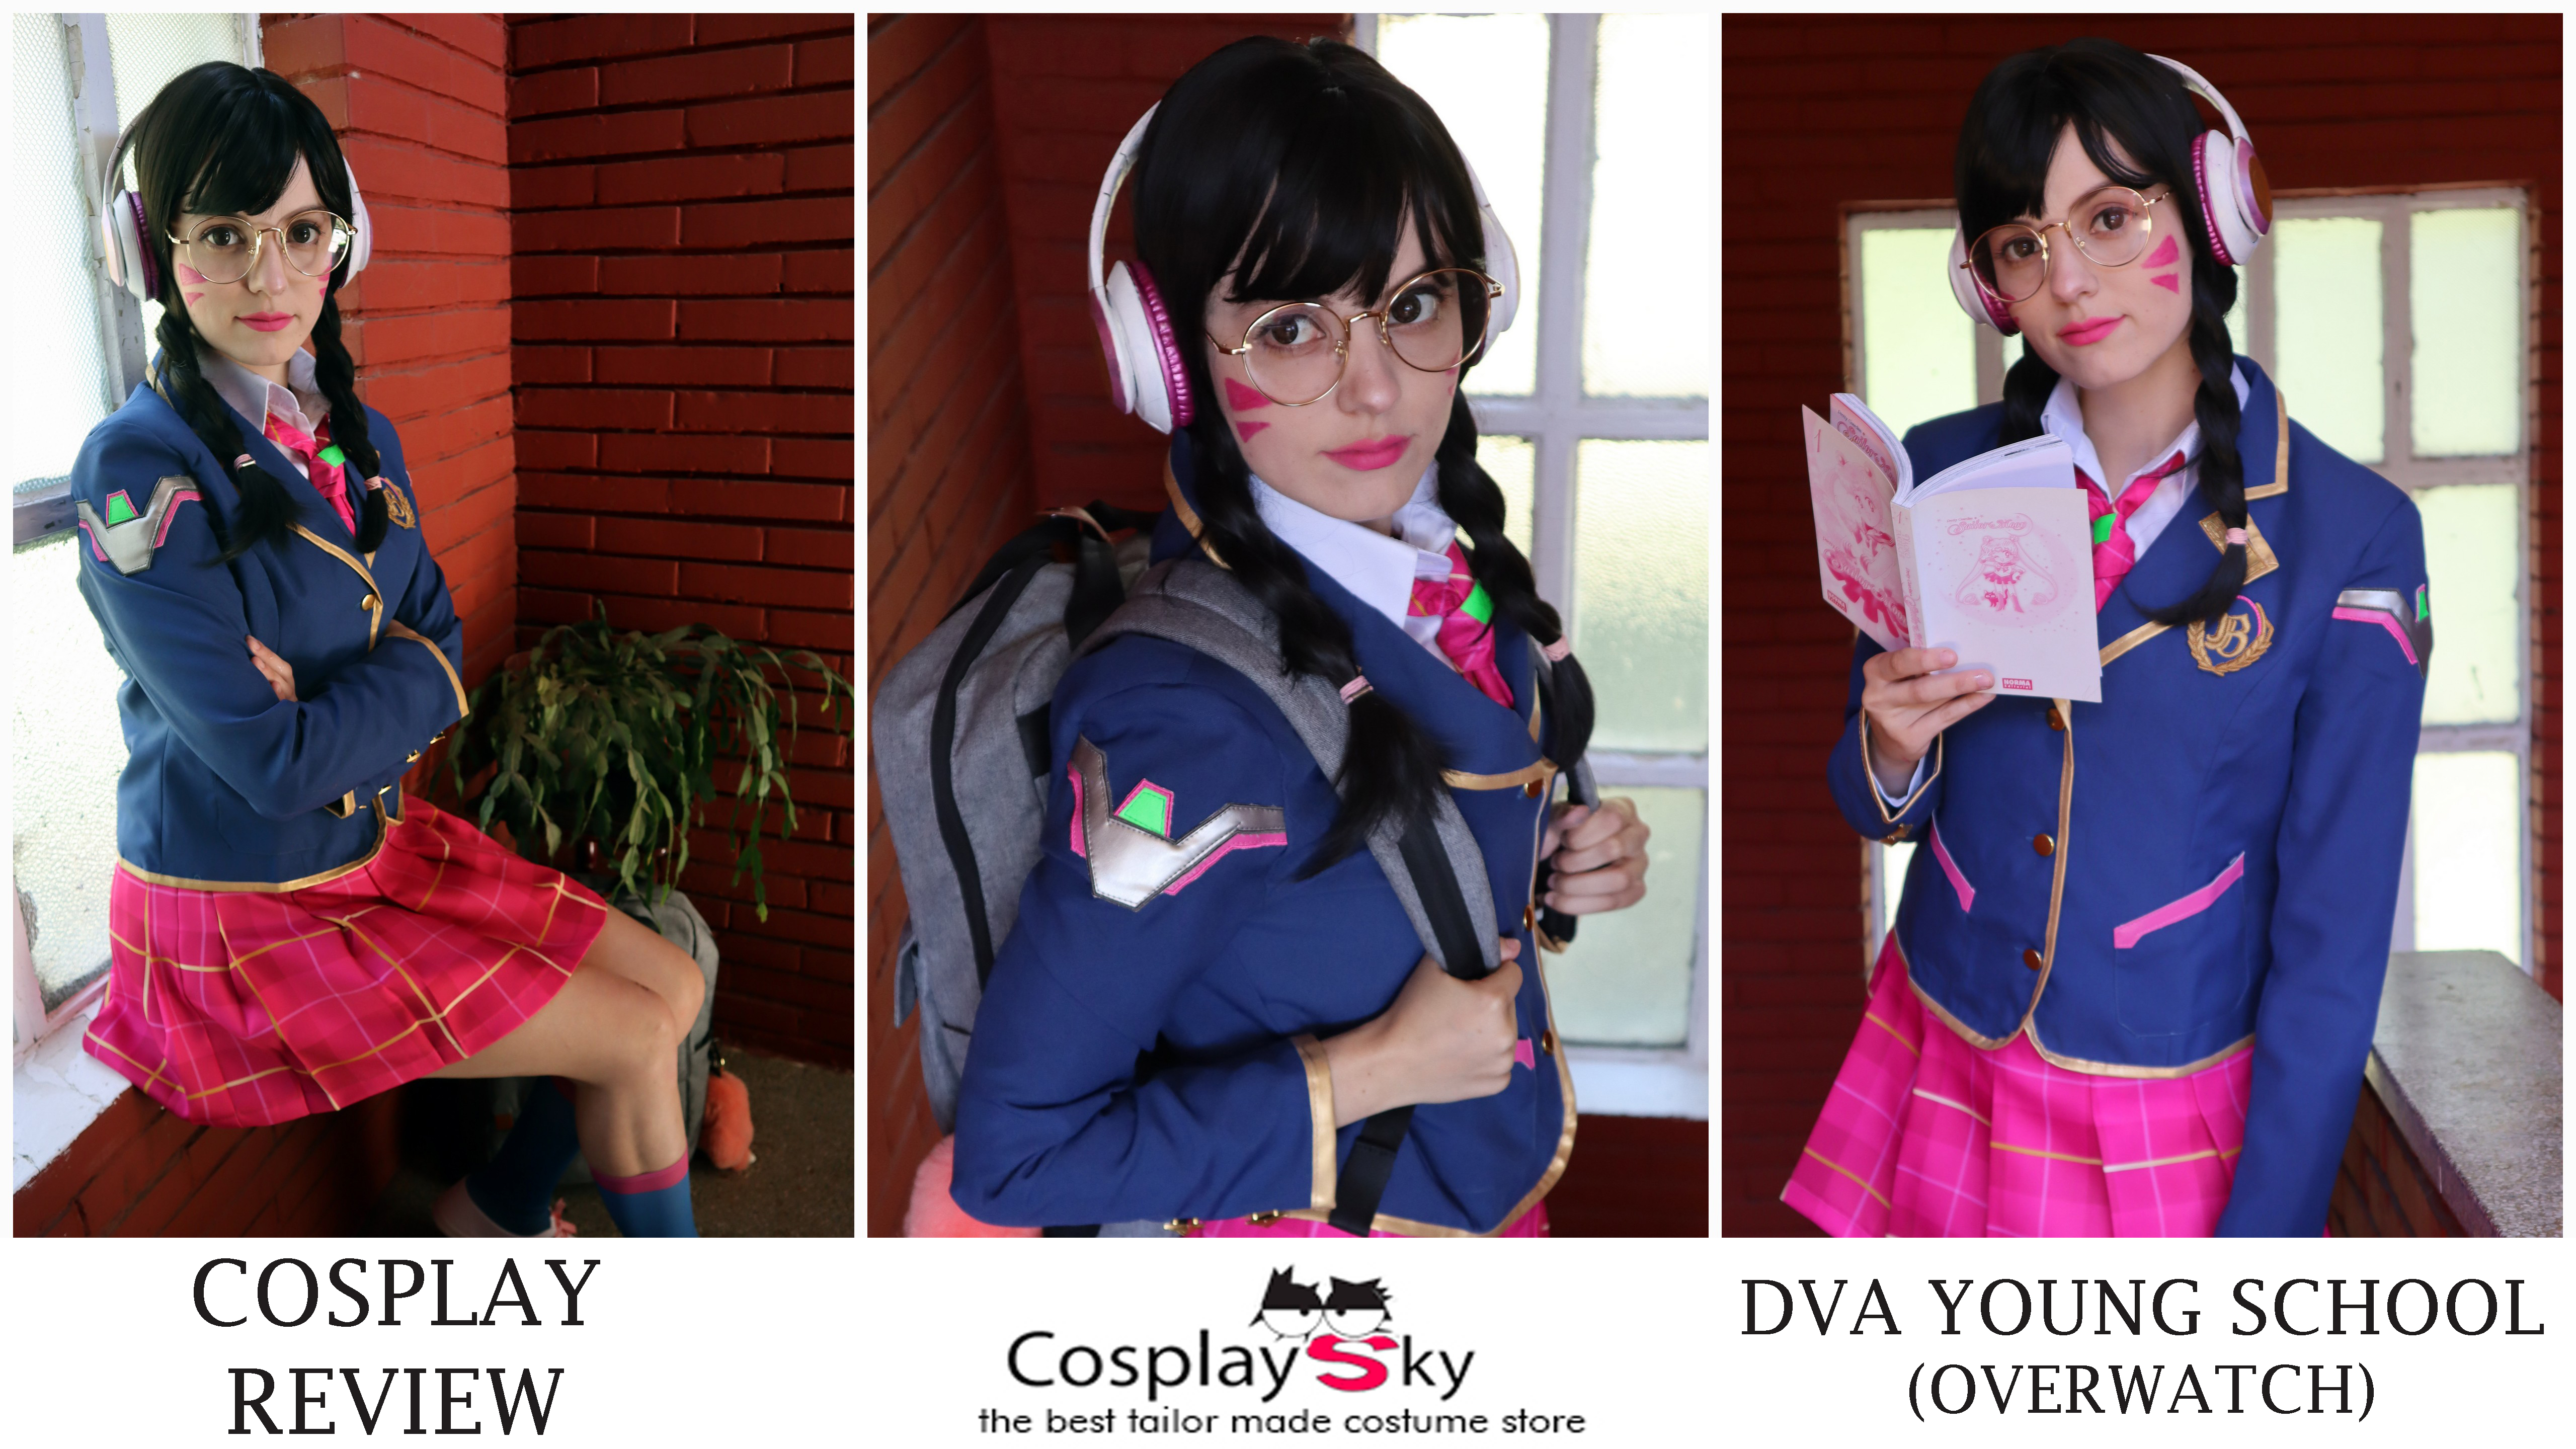 Cosplay Review: DVA young school from Cosplay Sky